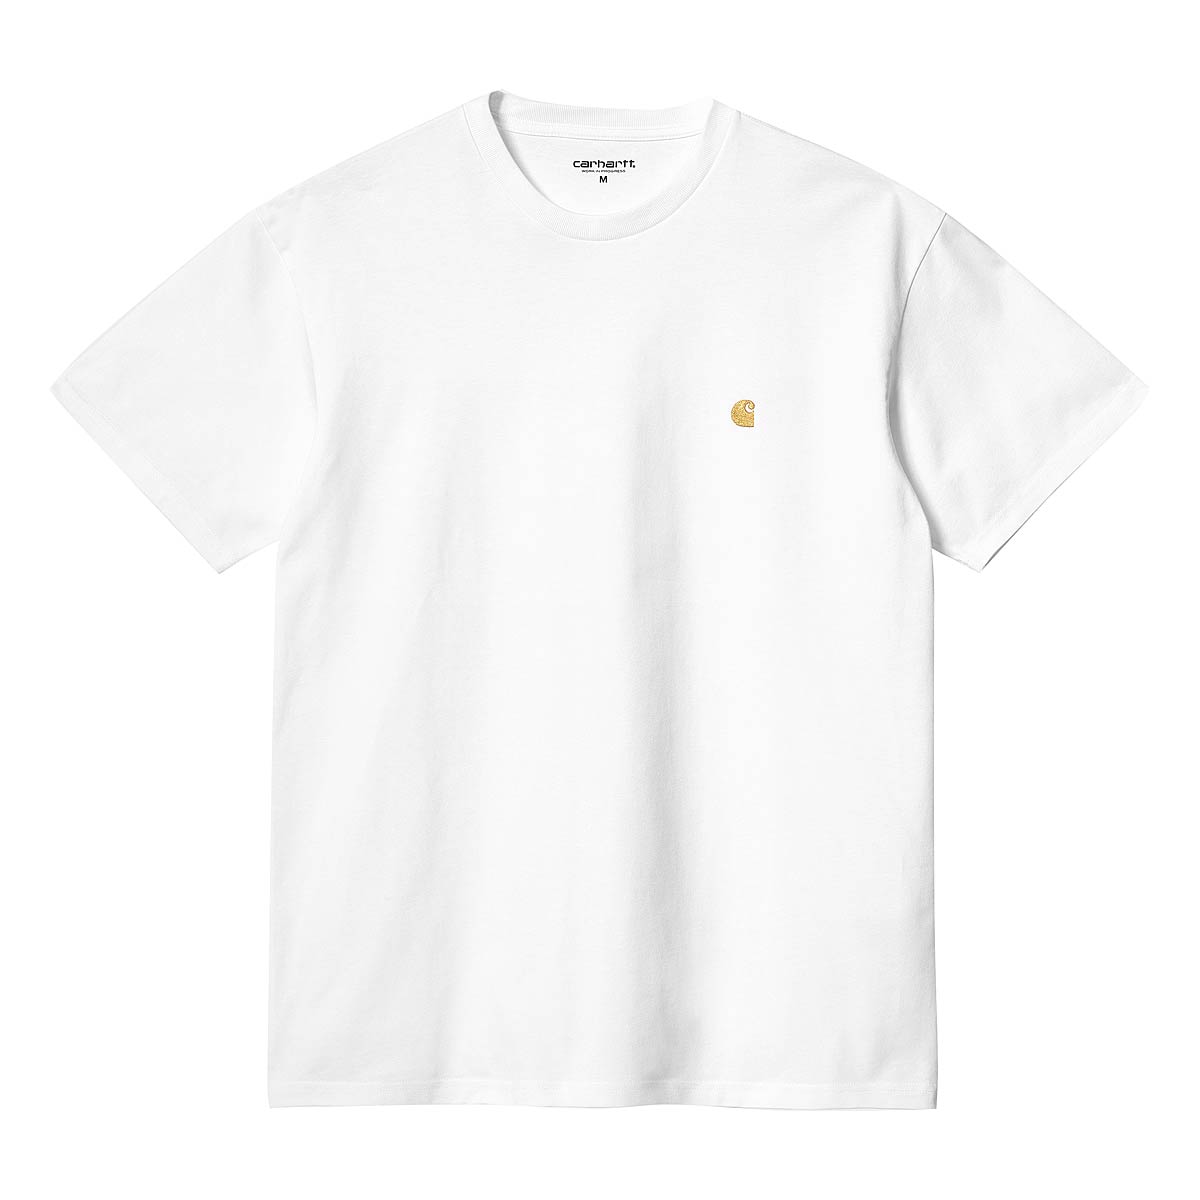 Carhartt Wip S/s Chase T-shirt, Weiß/gold S